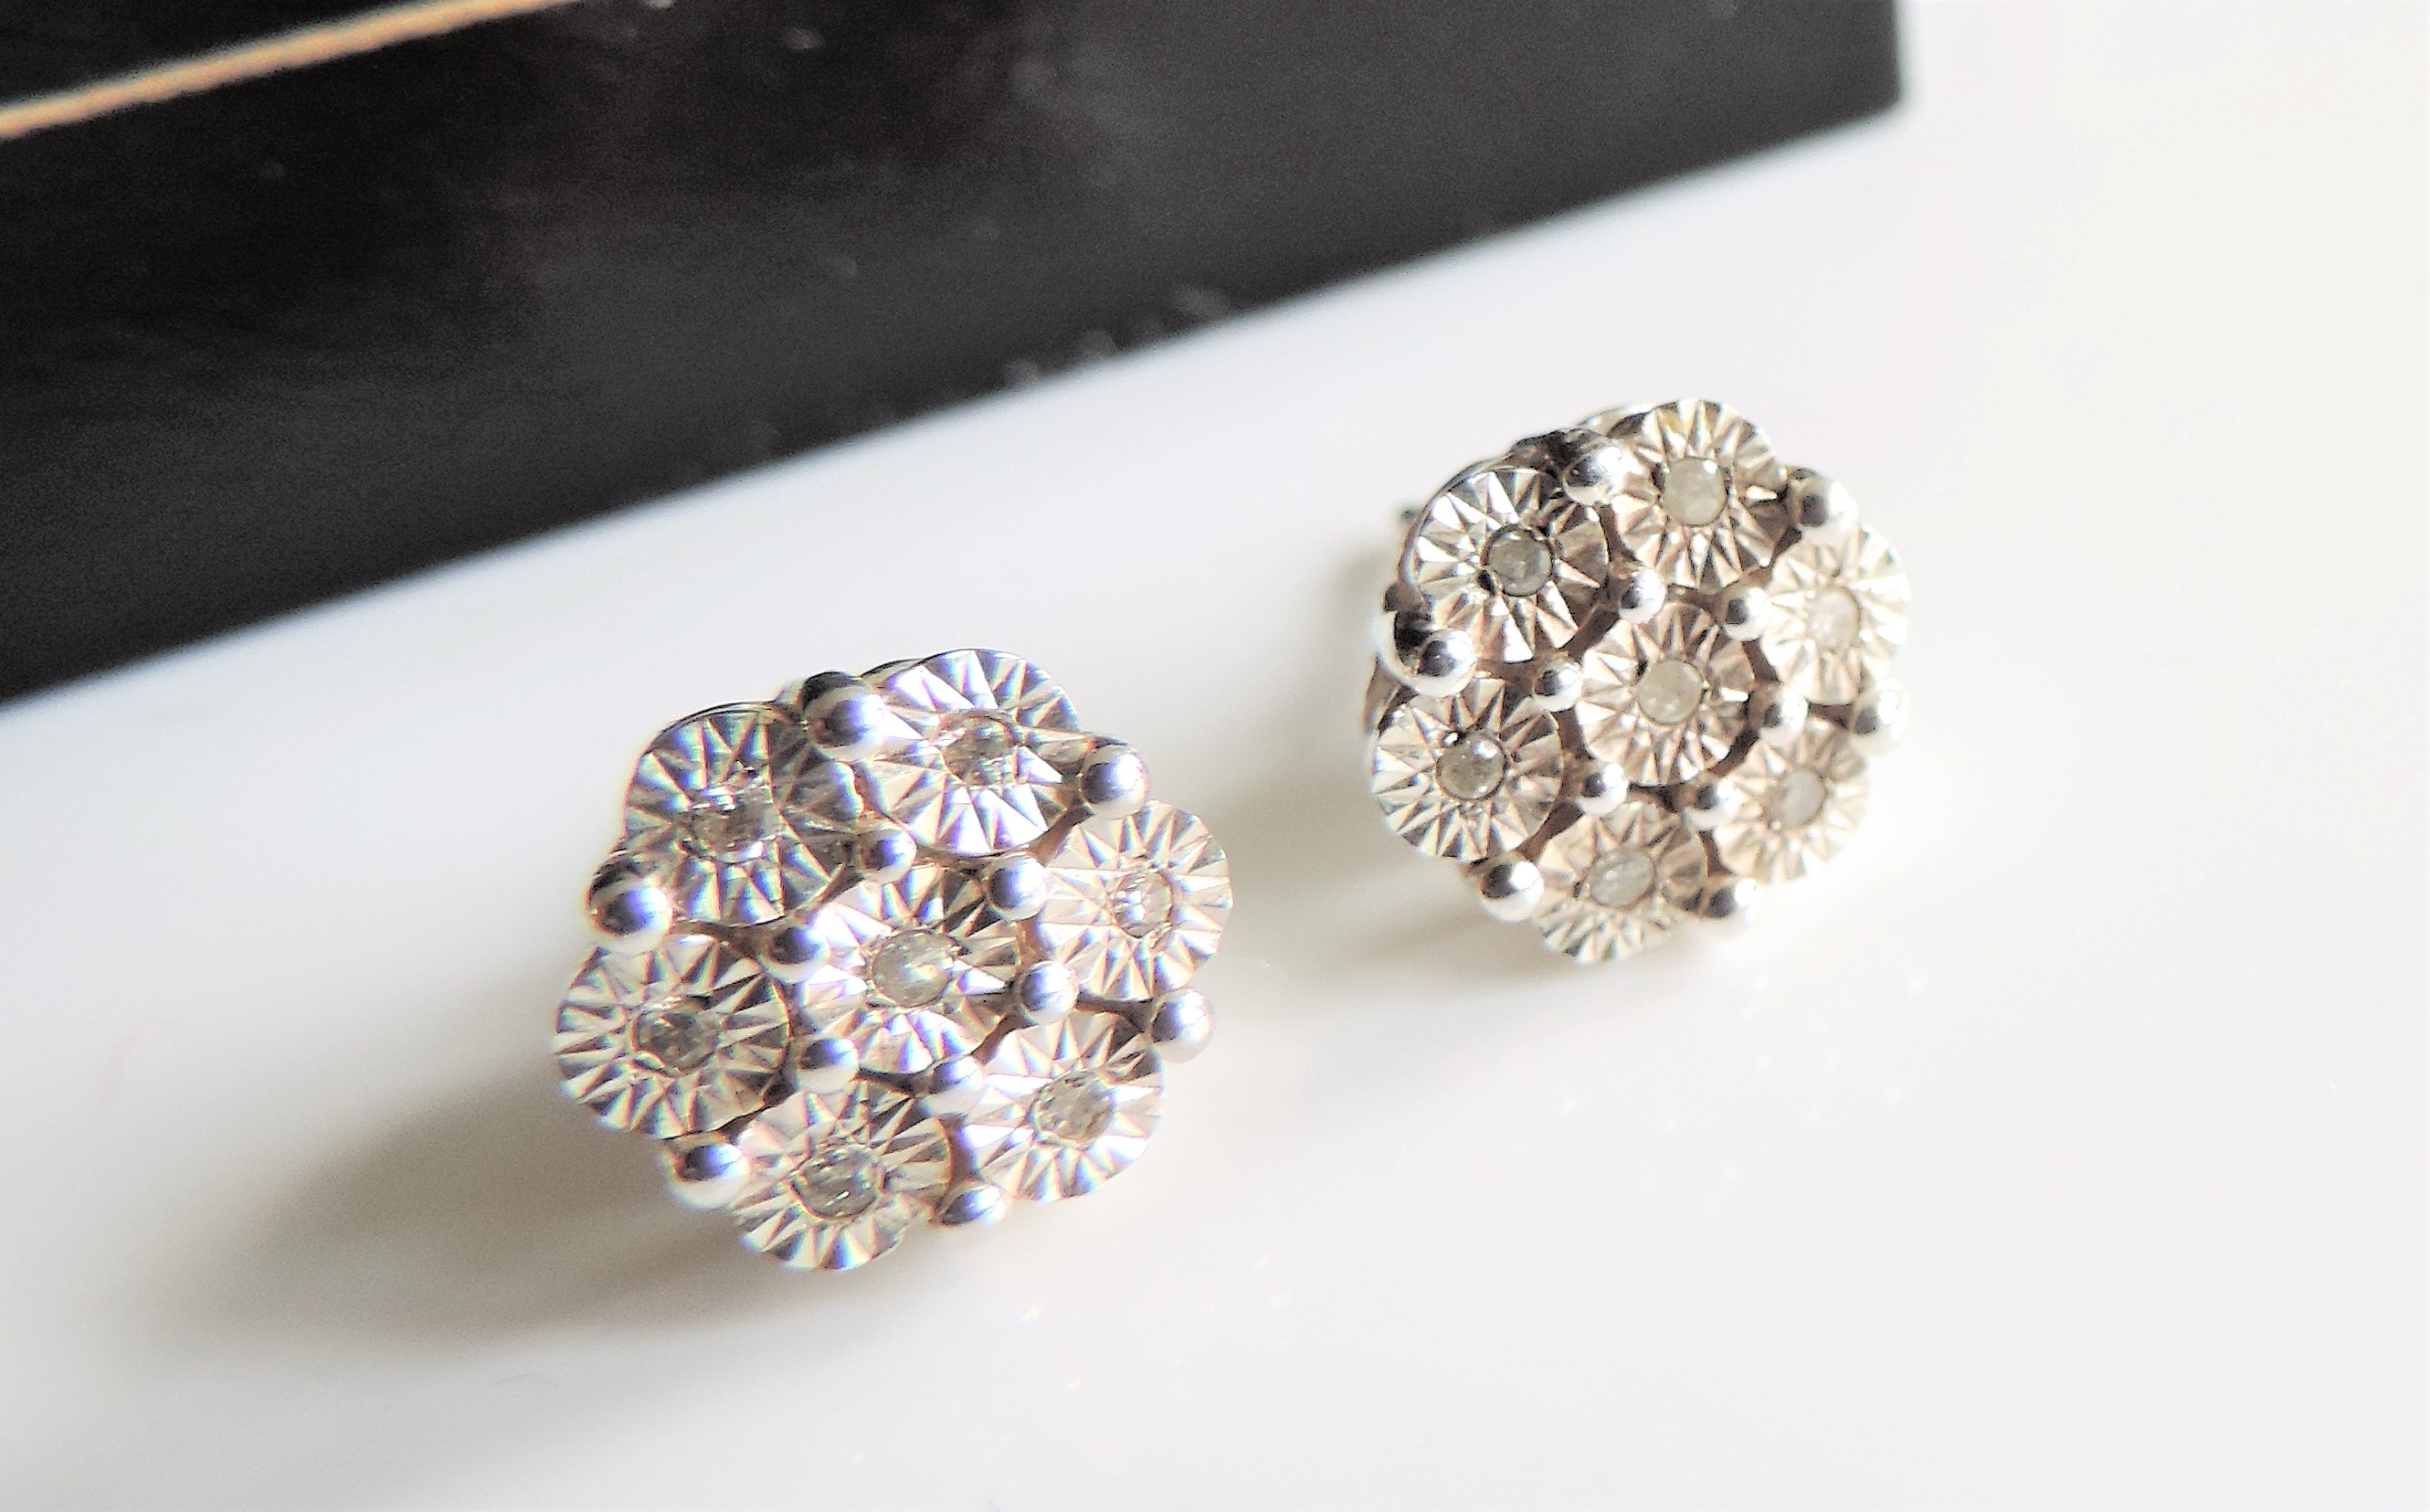 Sterling Silver Diamond Earrings New with Gift Box - Image 2 of 5